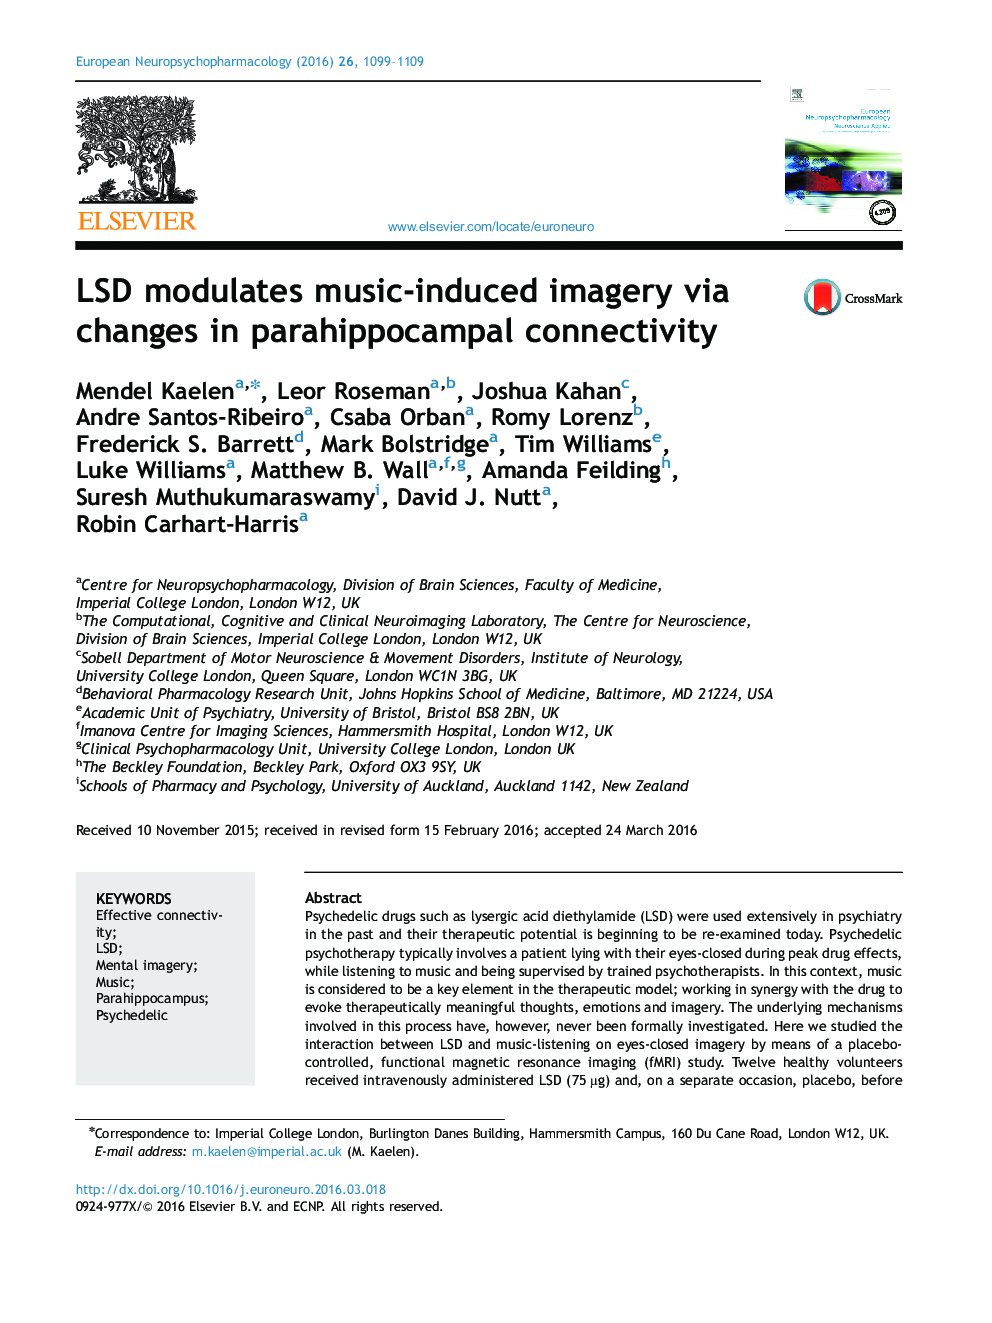 LSD modulates music-induced imagery via changes in parahippocampal connectivity